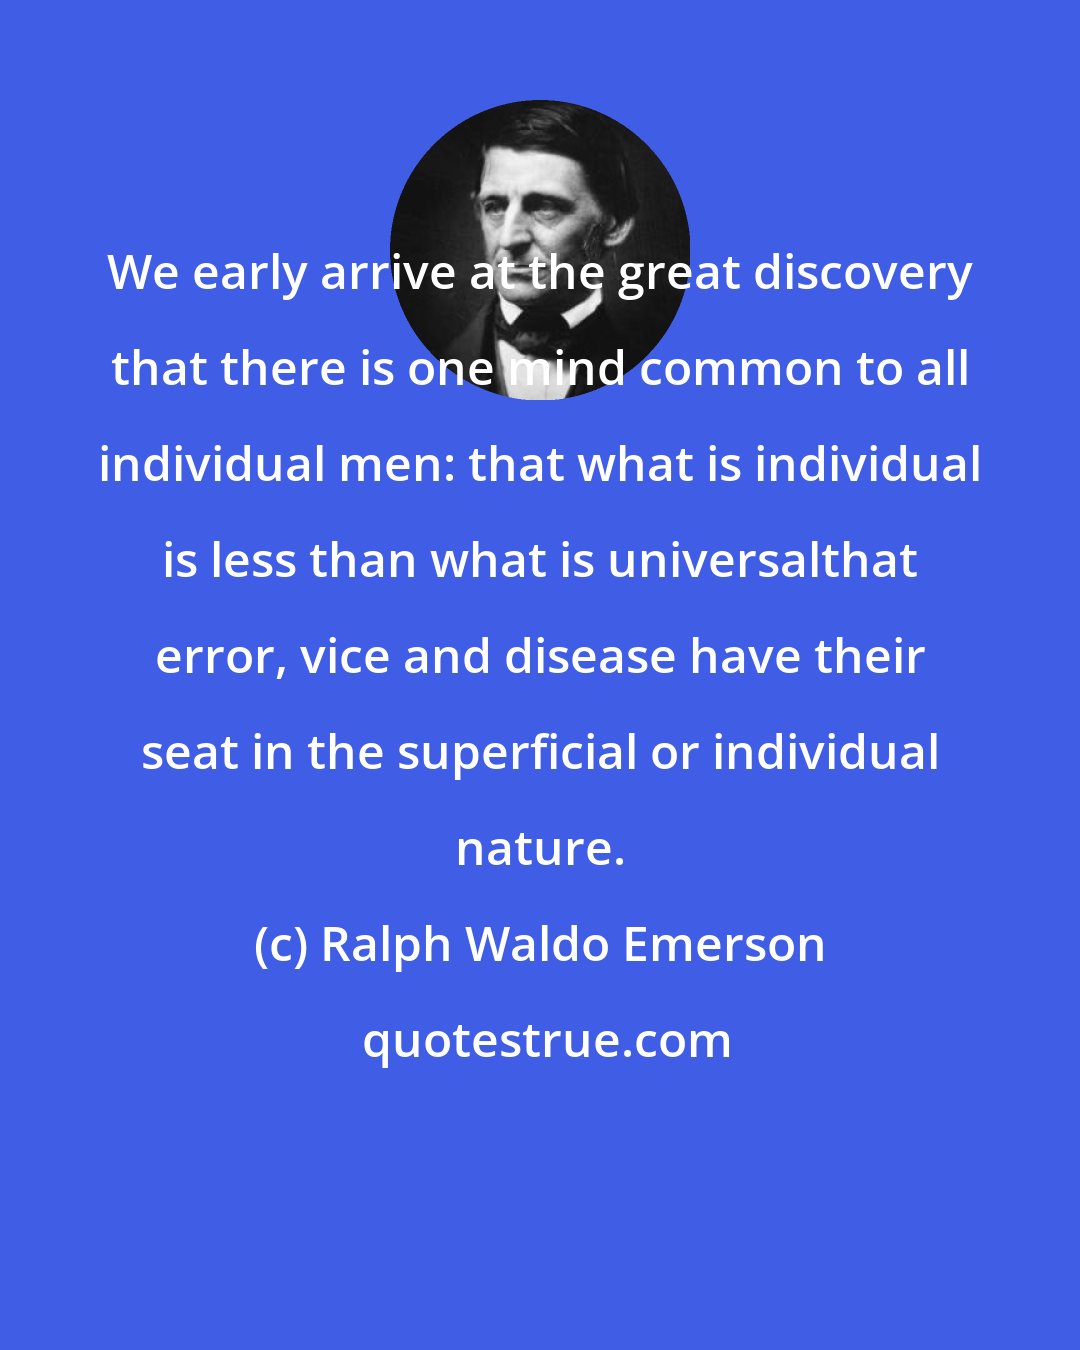 Ralph Waldo Emerson: We early arrive at the great discovery that there is one mind common to all individual men: that what is individual is less than what is universalthat error, vice and disease have their seat in the superficial or individual nature.